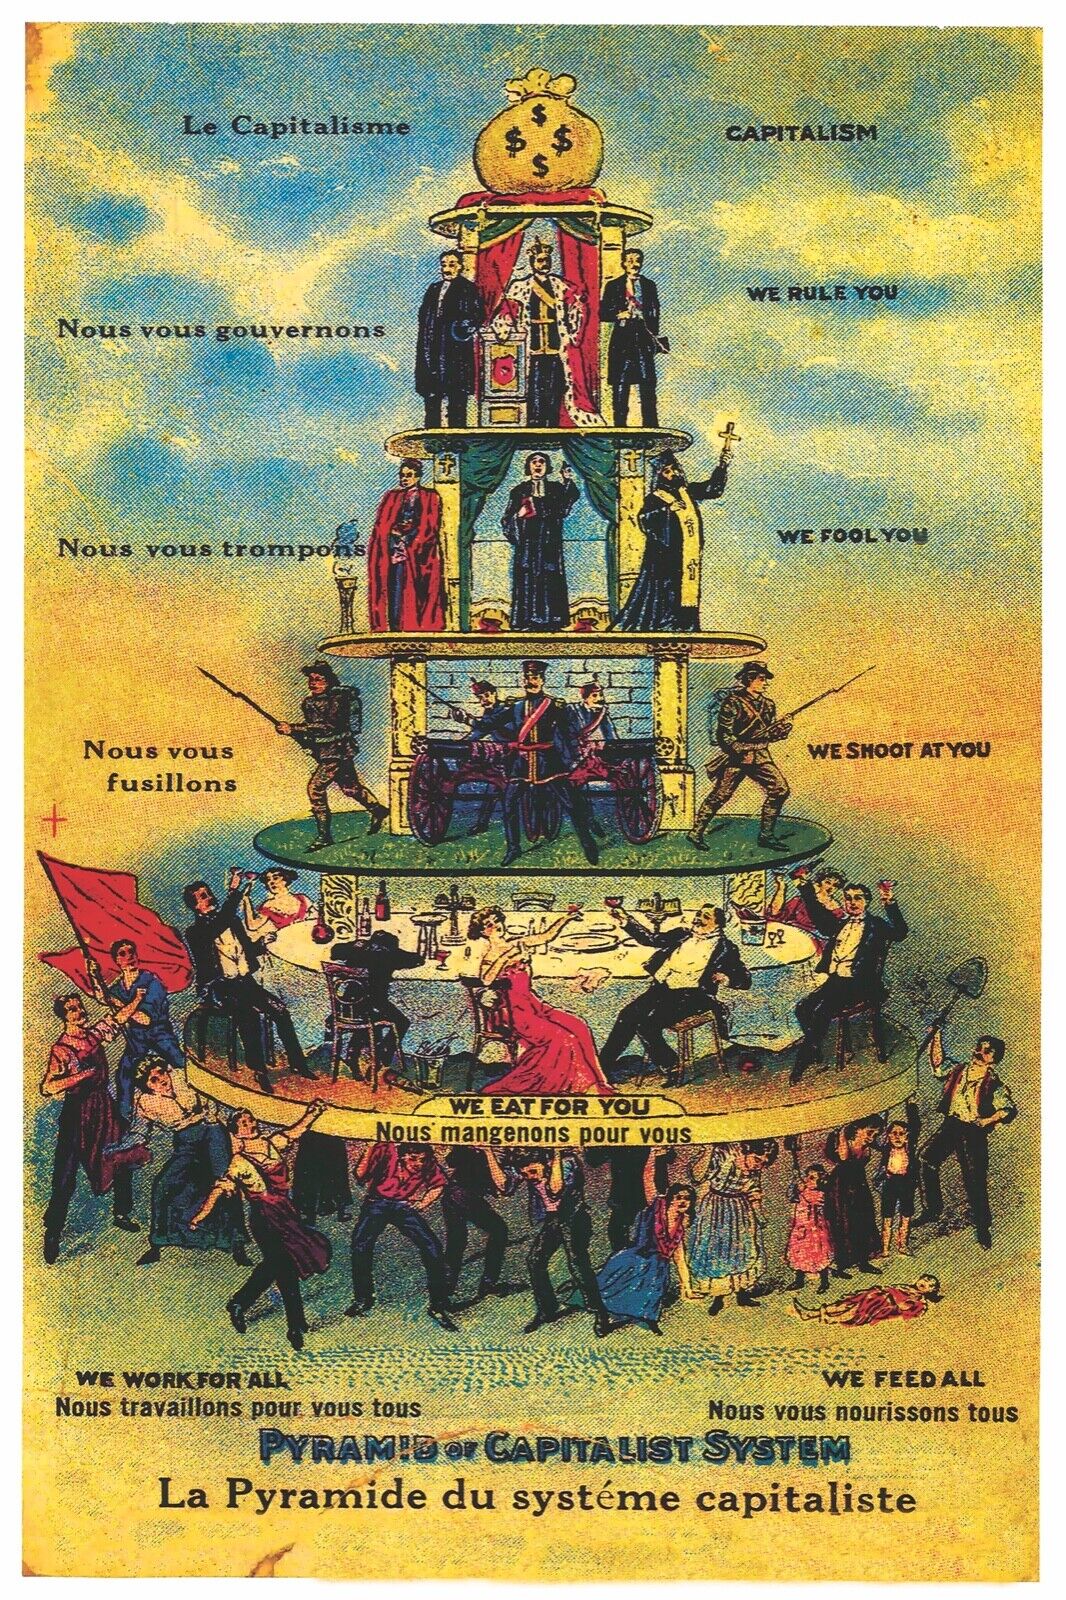 Pyramid of Capitalist System | Industrial Workers of the World | IWW | Wobblies